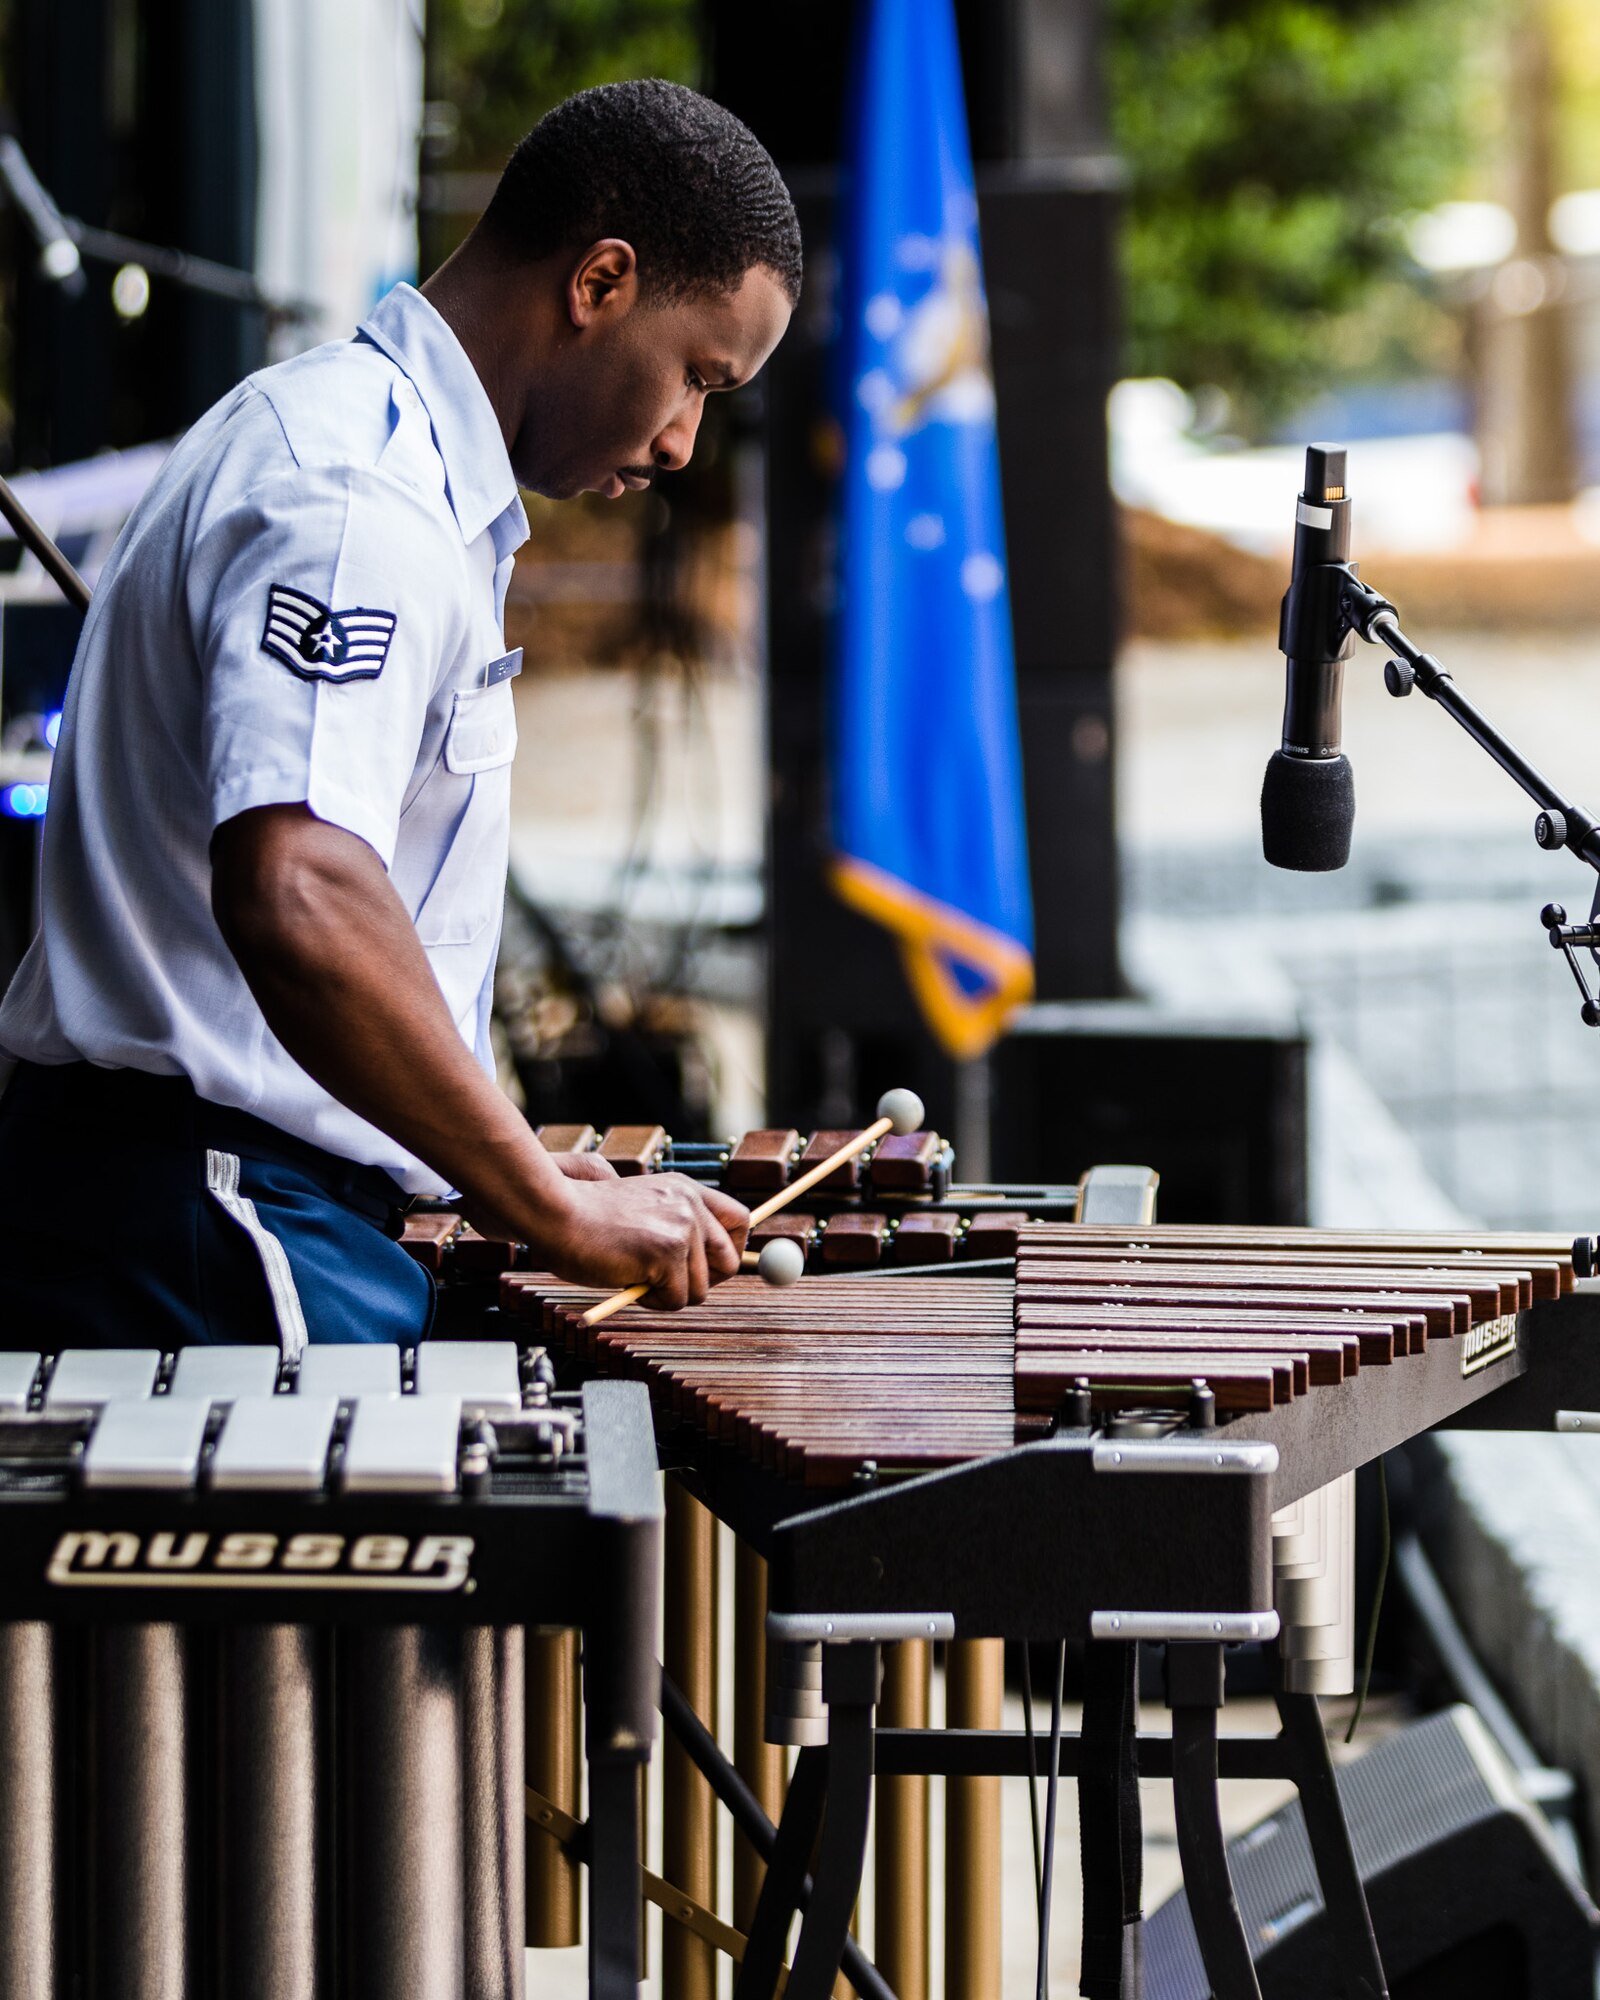 Staff Sergeant Quincy Brown performs an arrangement of Vittorio Monti's "Czardas" as a soloist with the concert band on xylophone, marimba, and vibraphone in his short sleeved blue uniform during a spring 2019 tour of the southeastern United States.